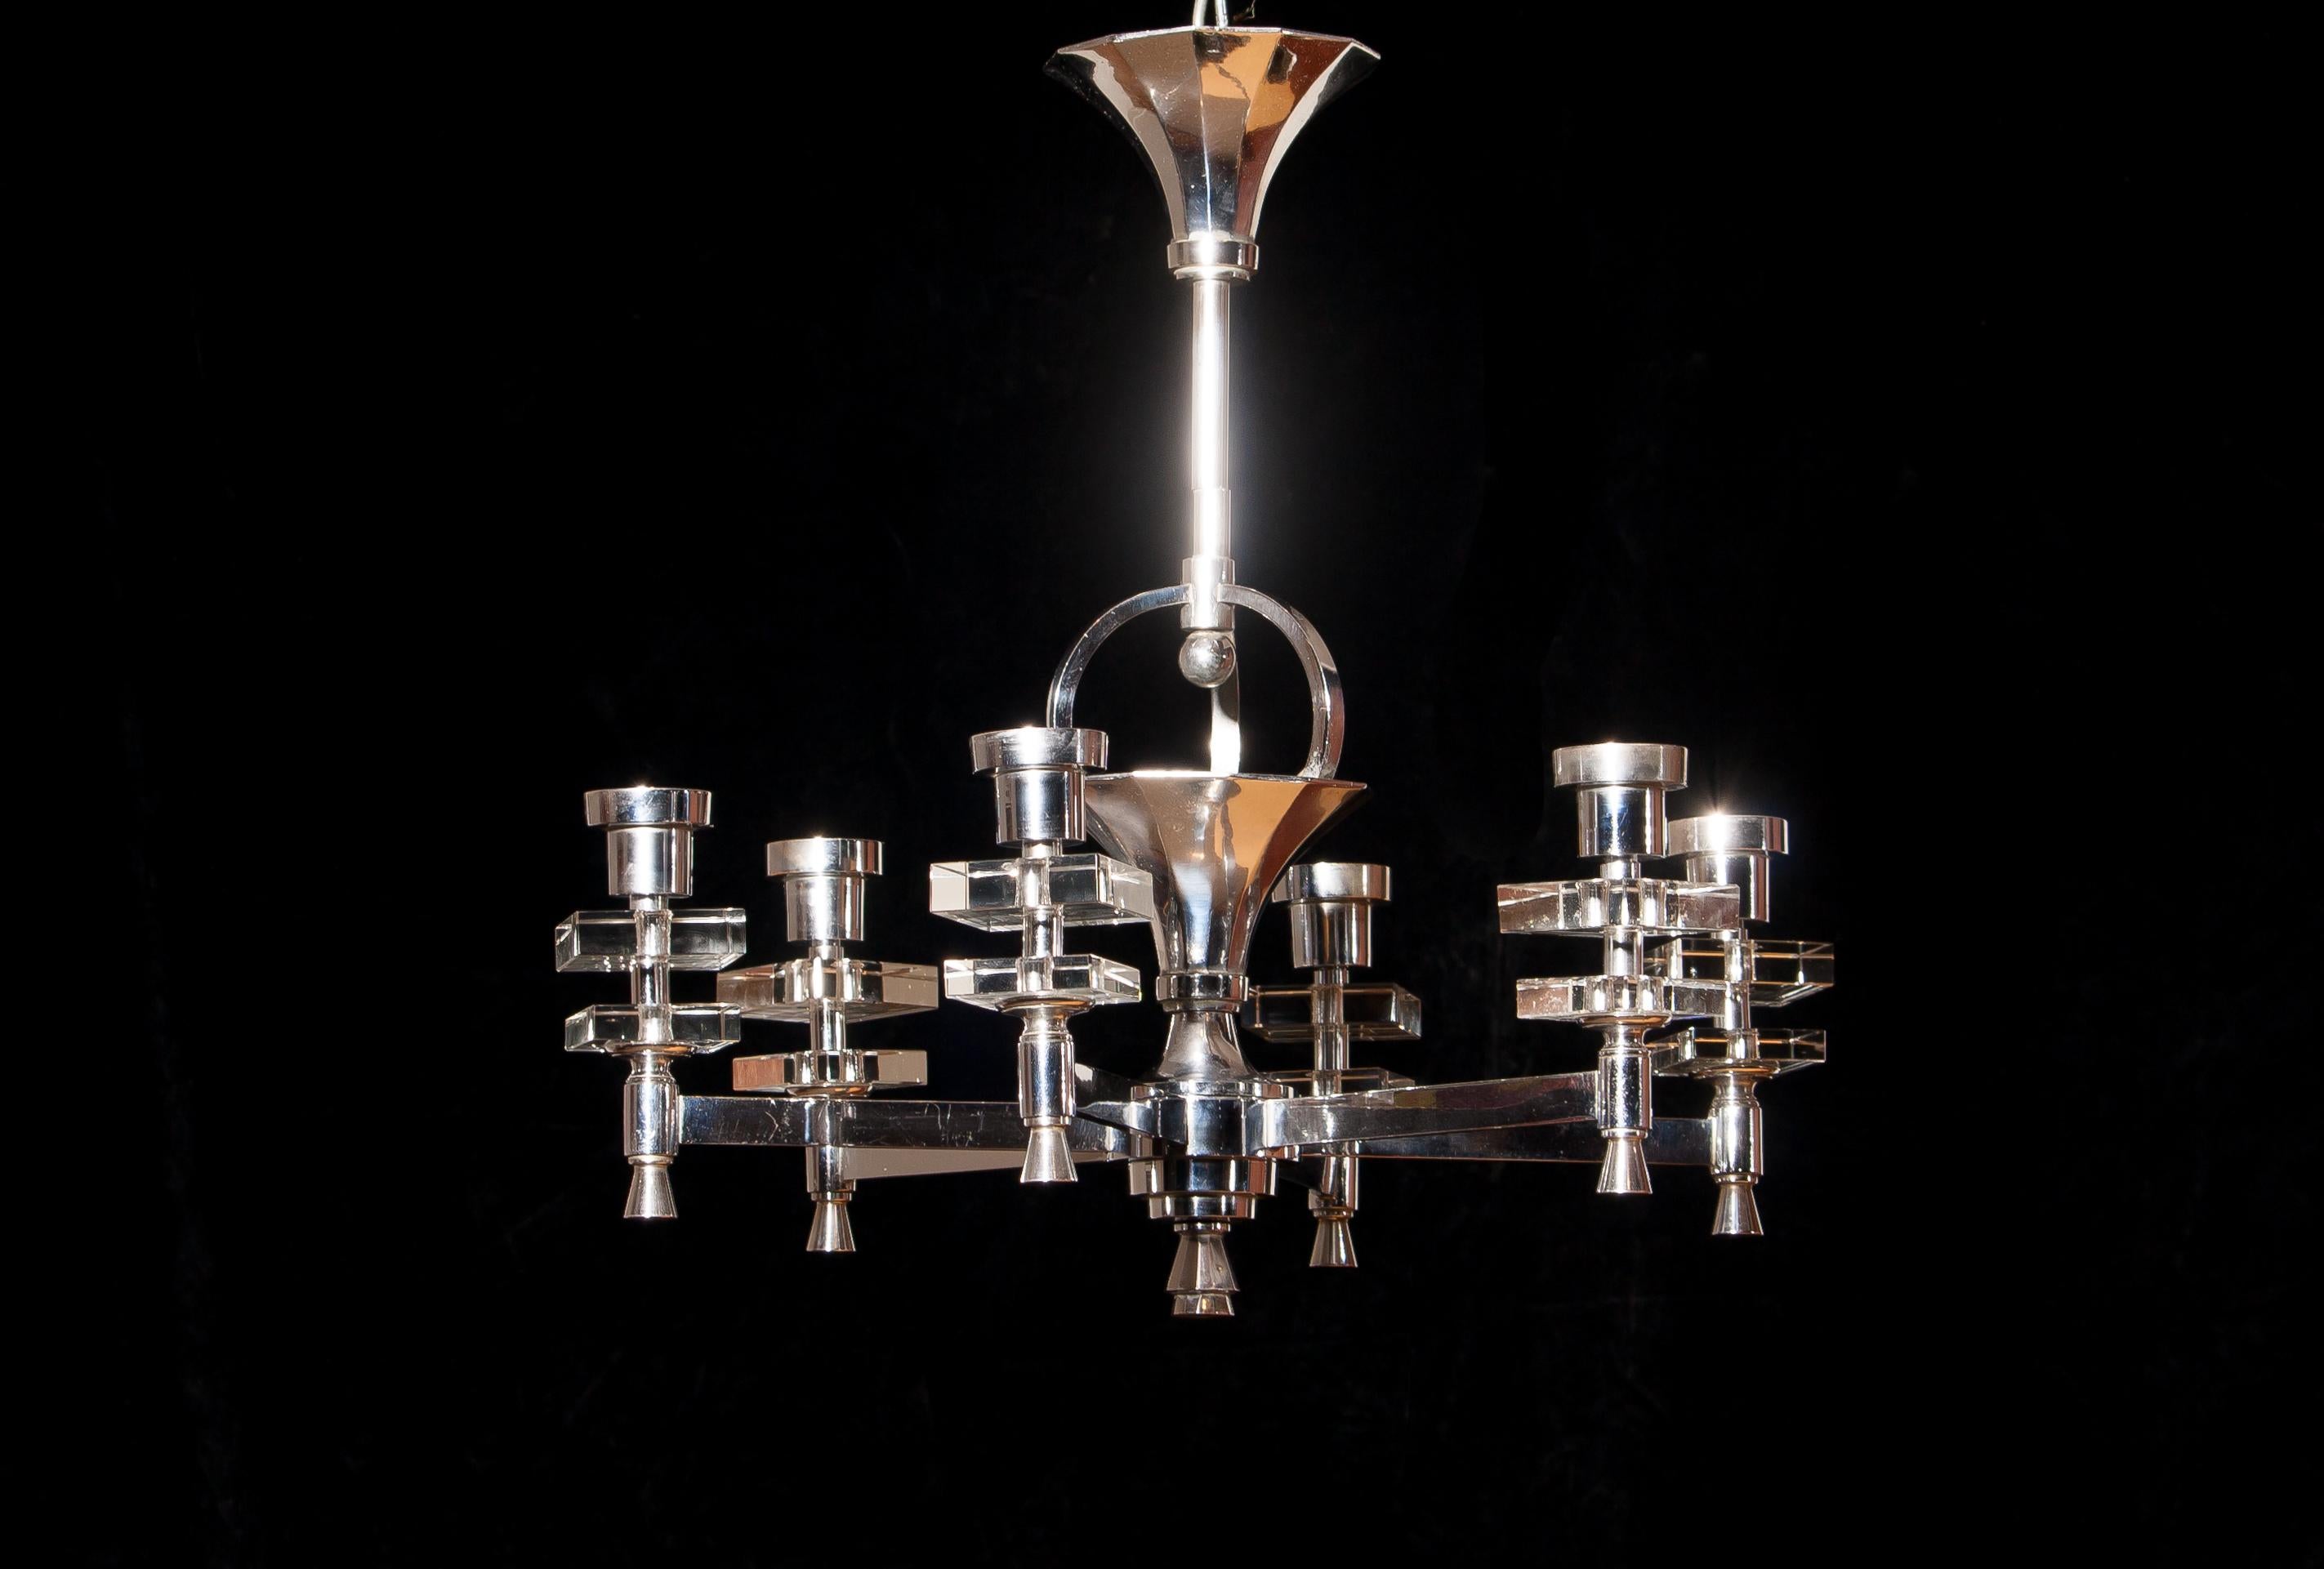 Beautiful chromed chandelier made in France.
This lamp has six arms with crystal square details.
It is in wonderful condition. (It will be totally rewired)
Period 1940s.
Dimensions: H 55 cm, ø 55 cm.